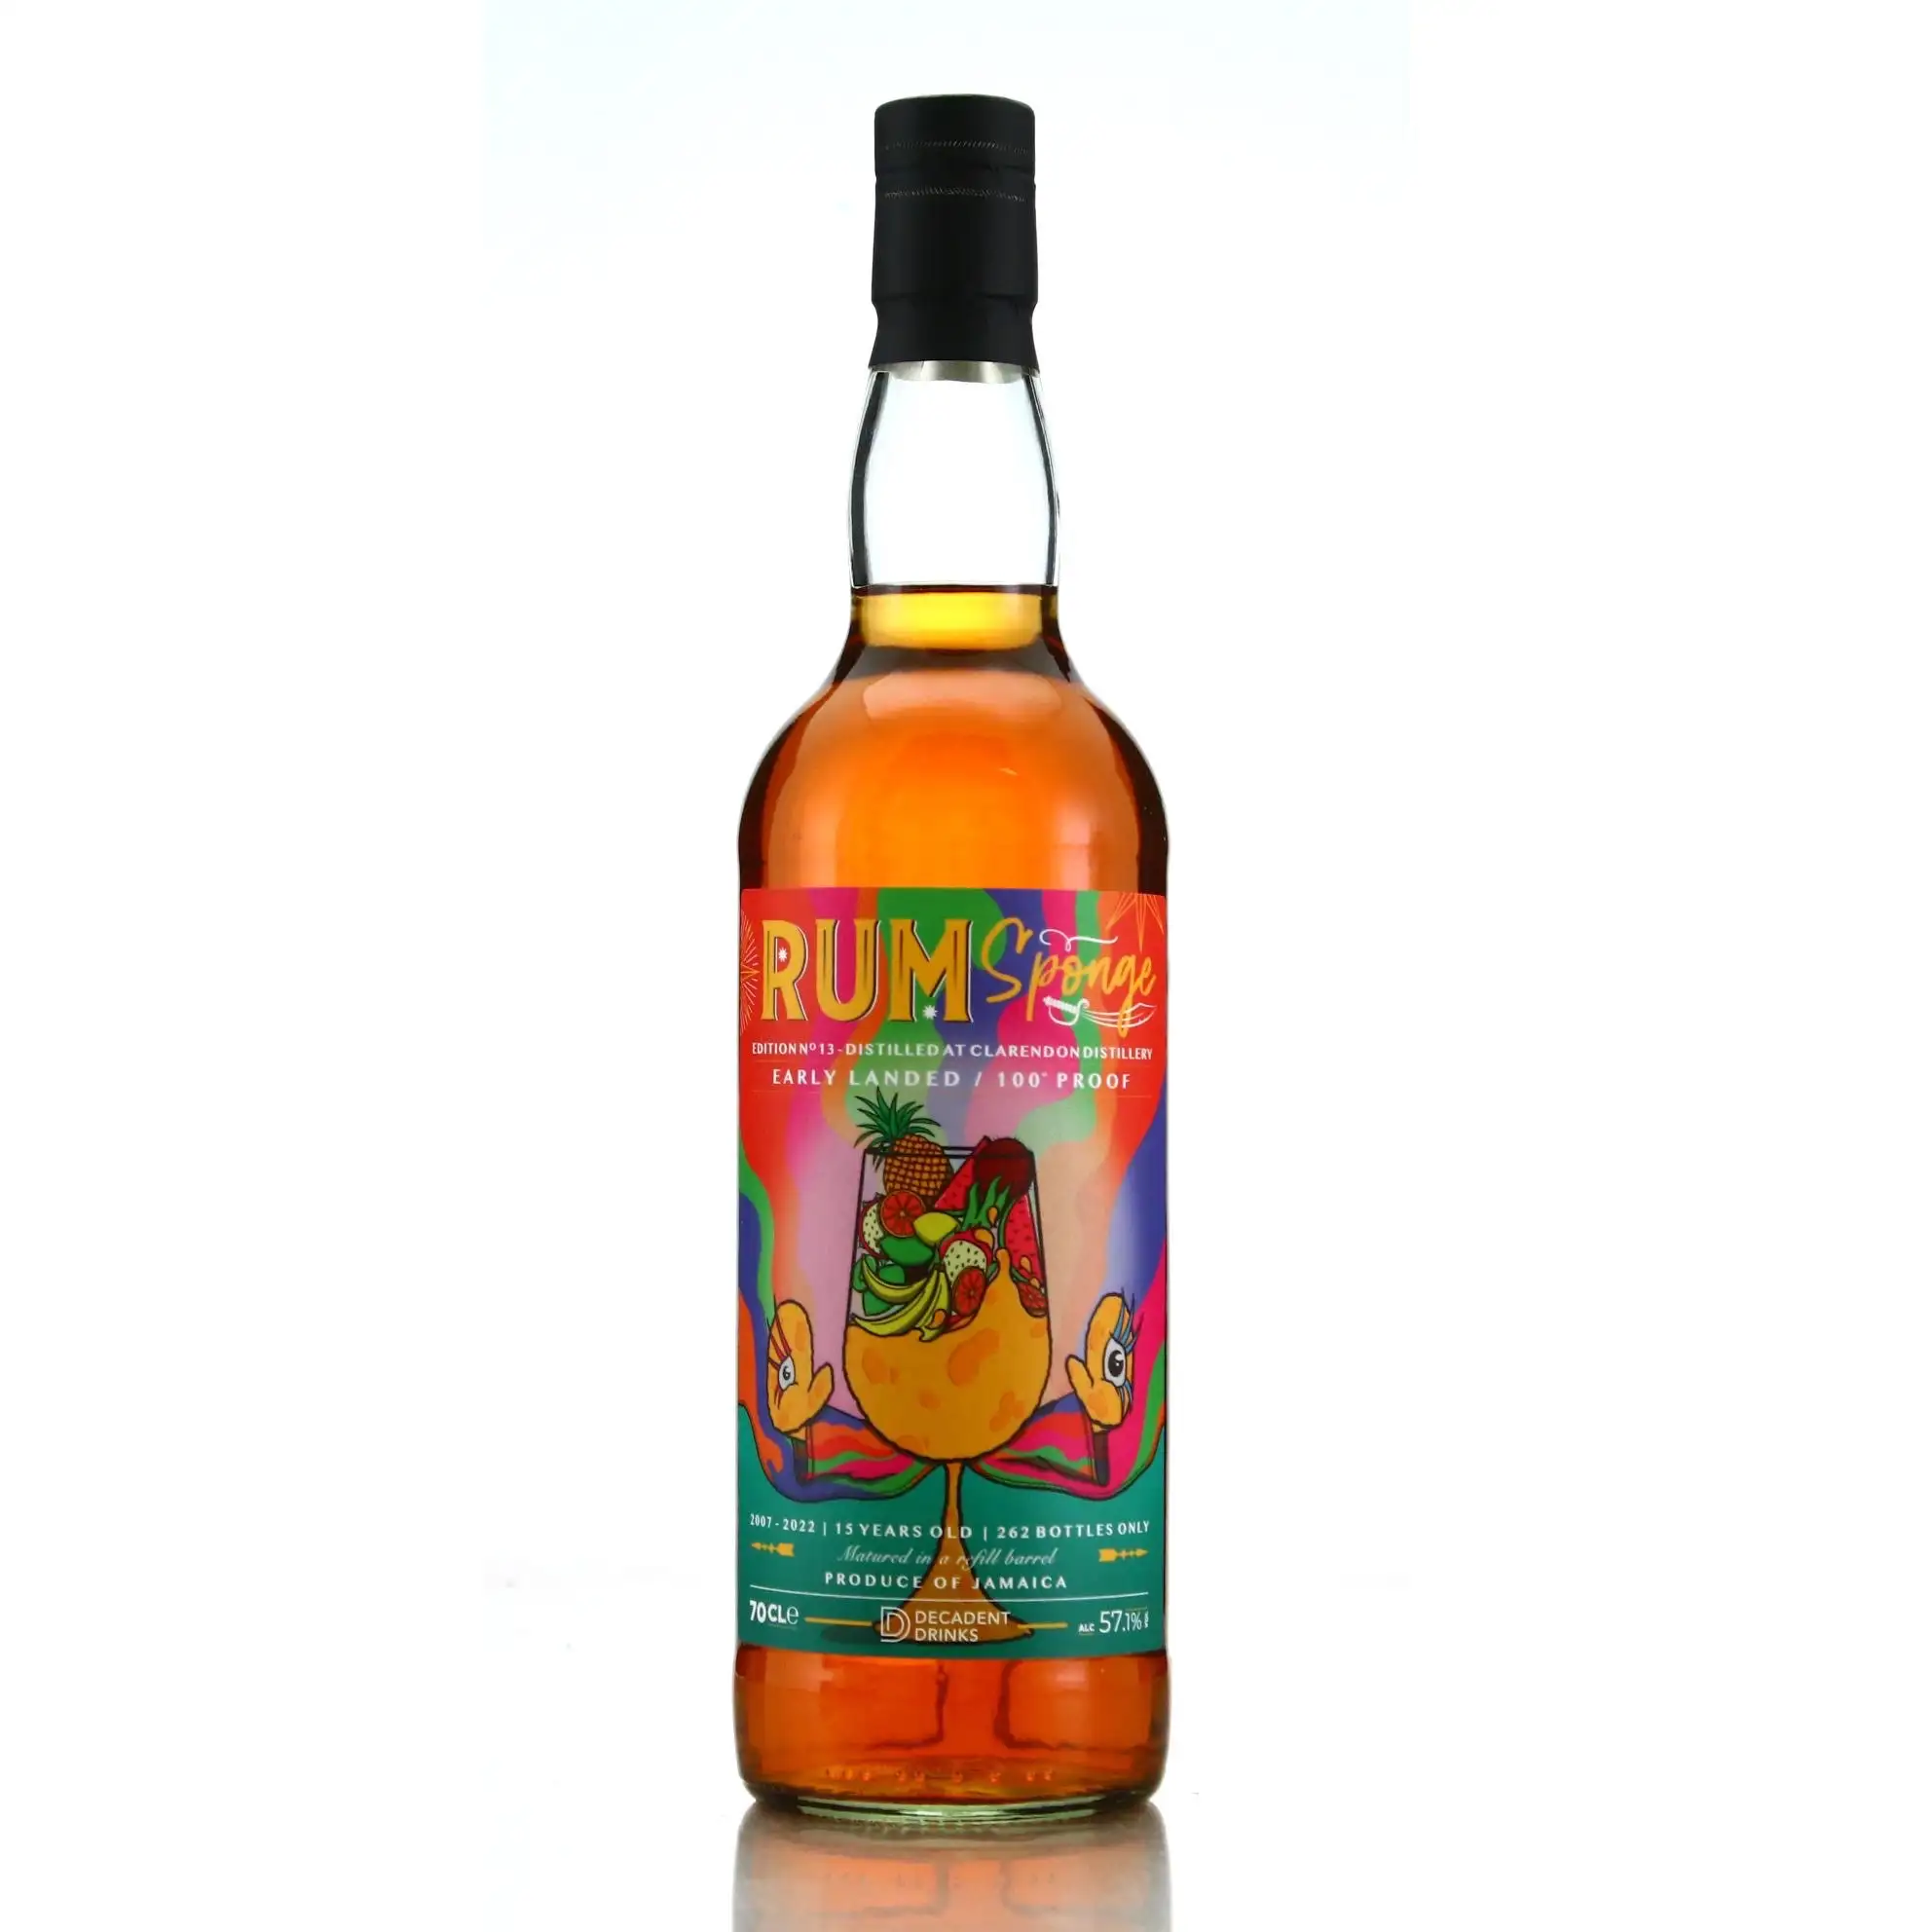 Image of the front of the bottle of the rum Rum Sponge No. 13